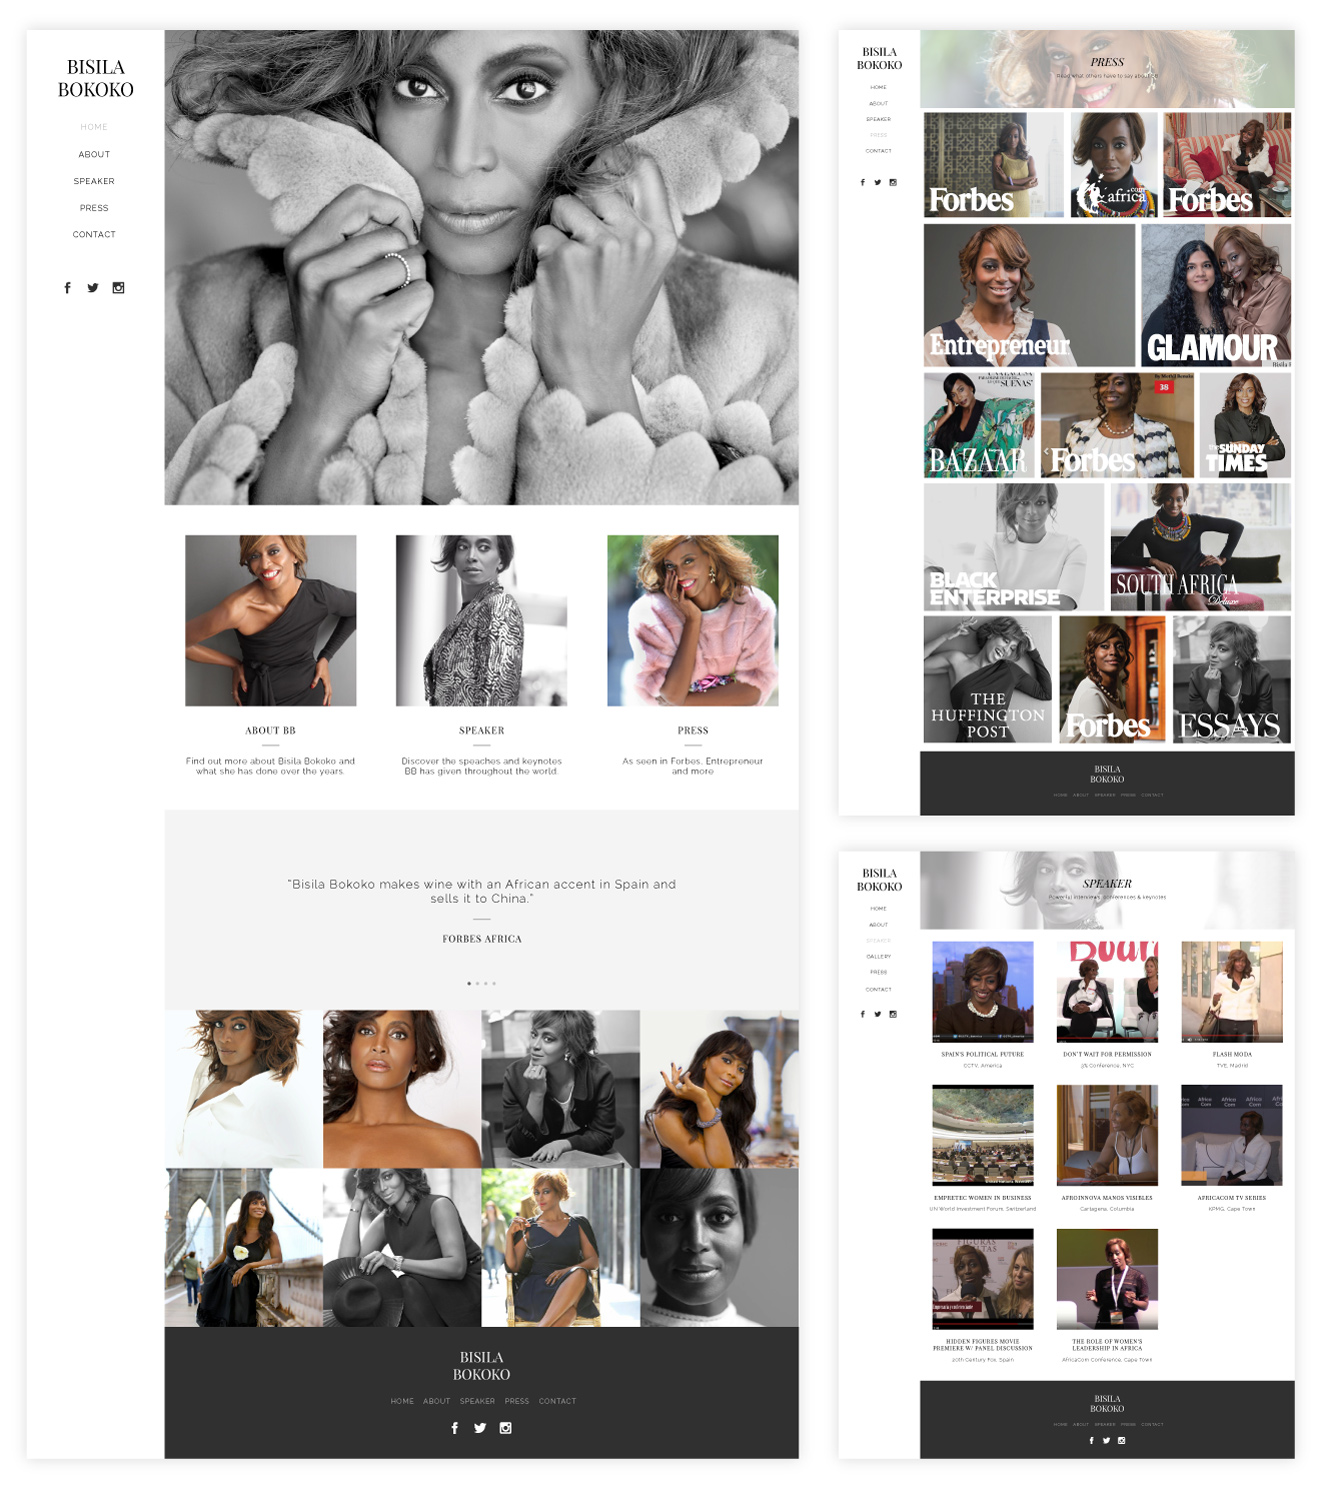 Bisila Bokoko - client of Tapat web agency and creative digital agency - web design pictures